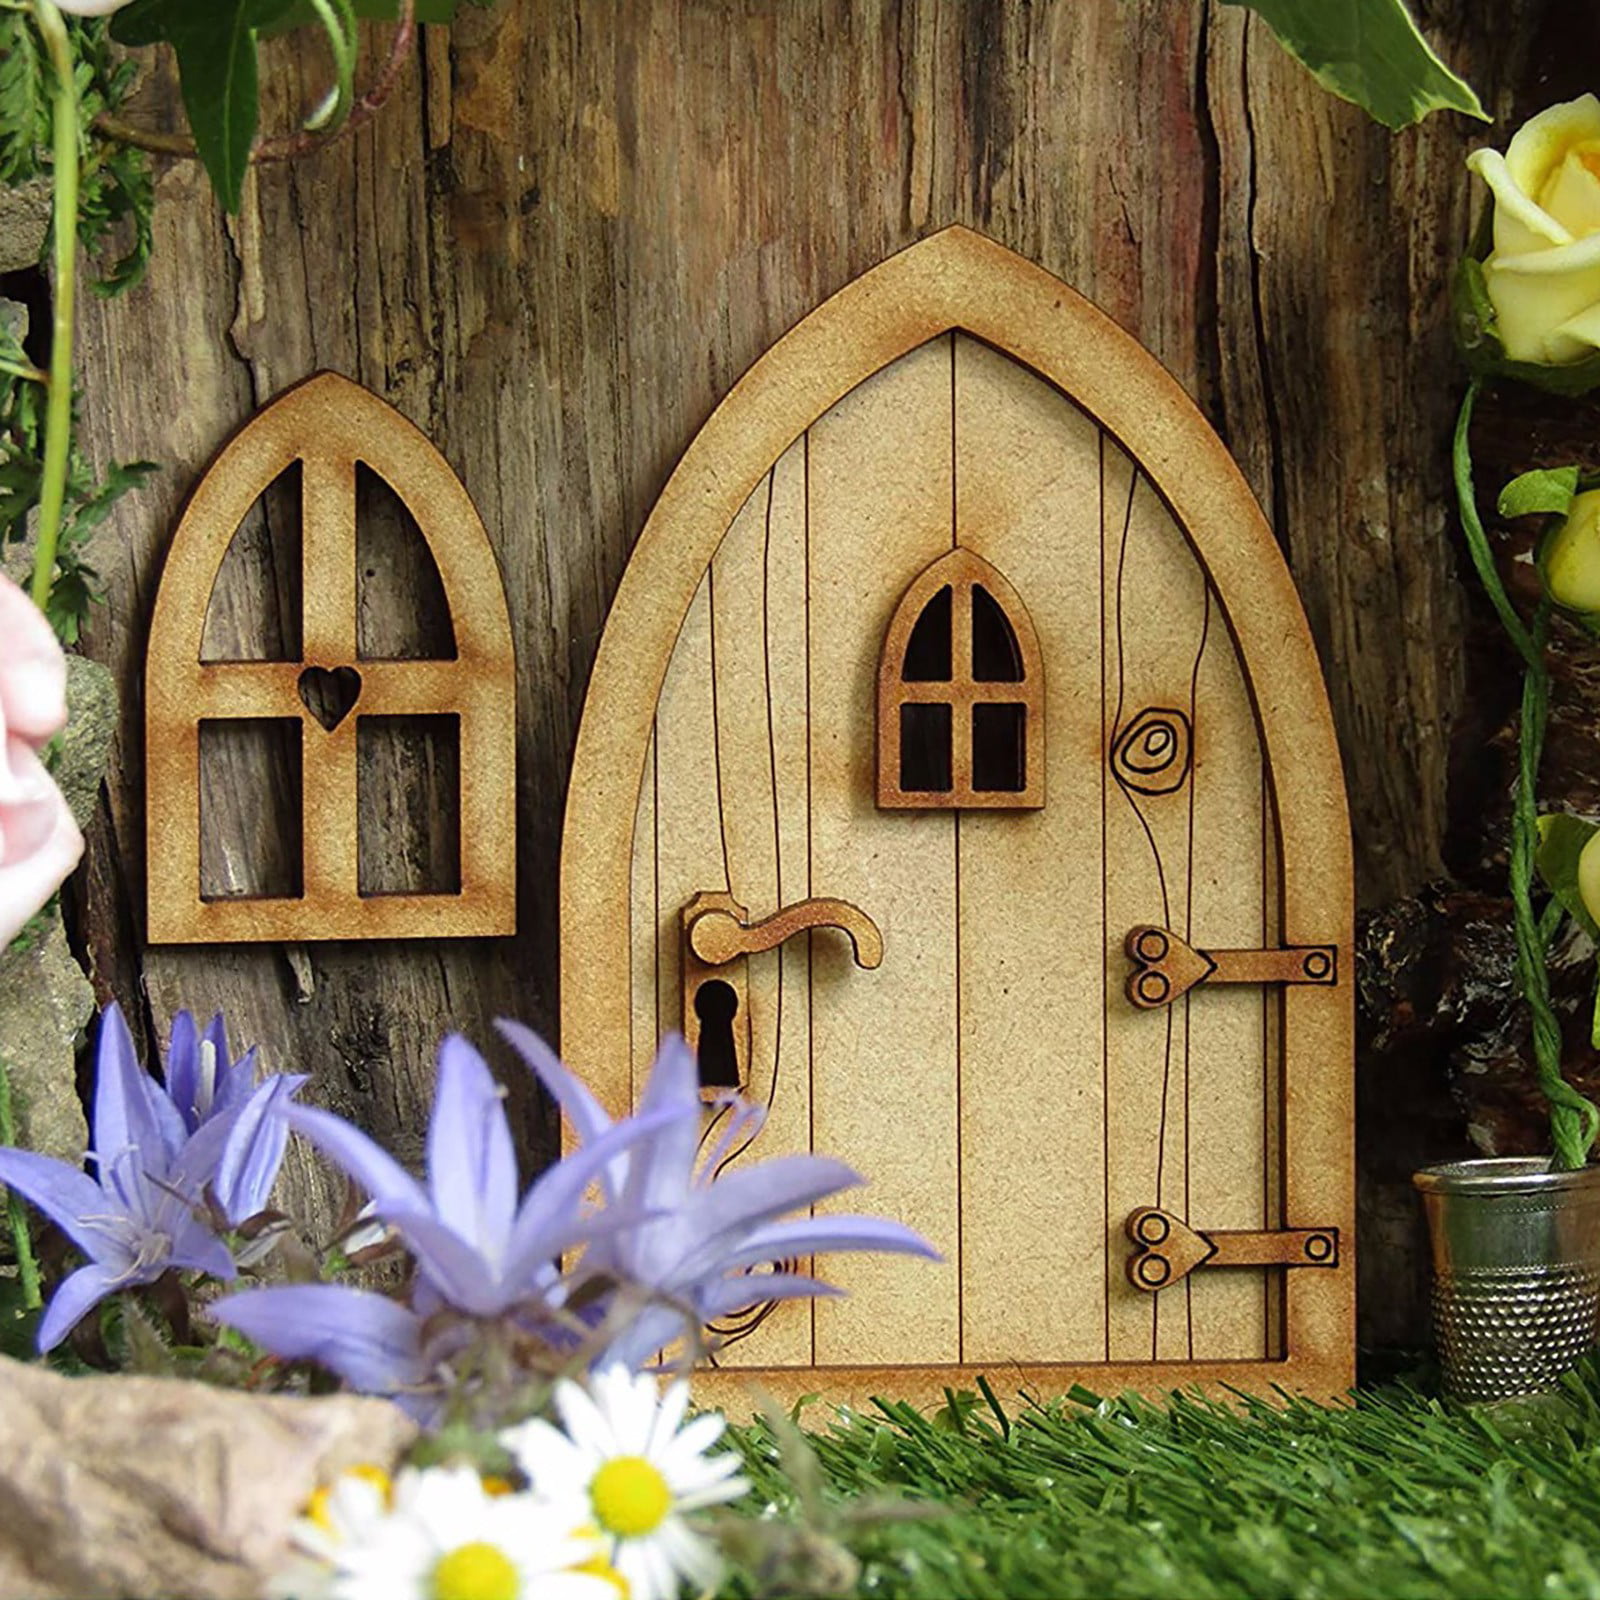 3D Wooden Fairy Elf Door Craft Kit Plain Blank Ready to Decorate  CODE KIT TOOTH 